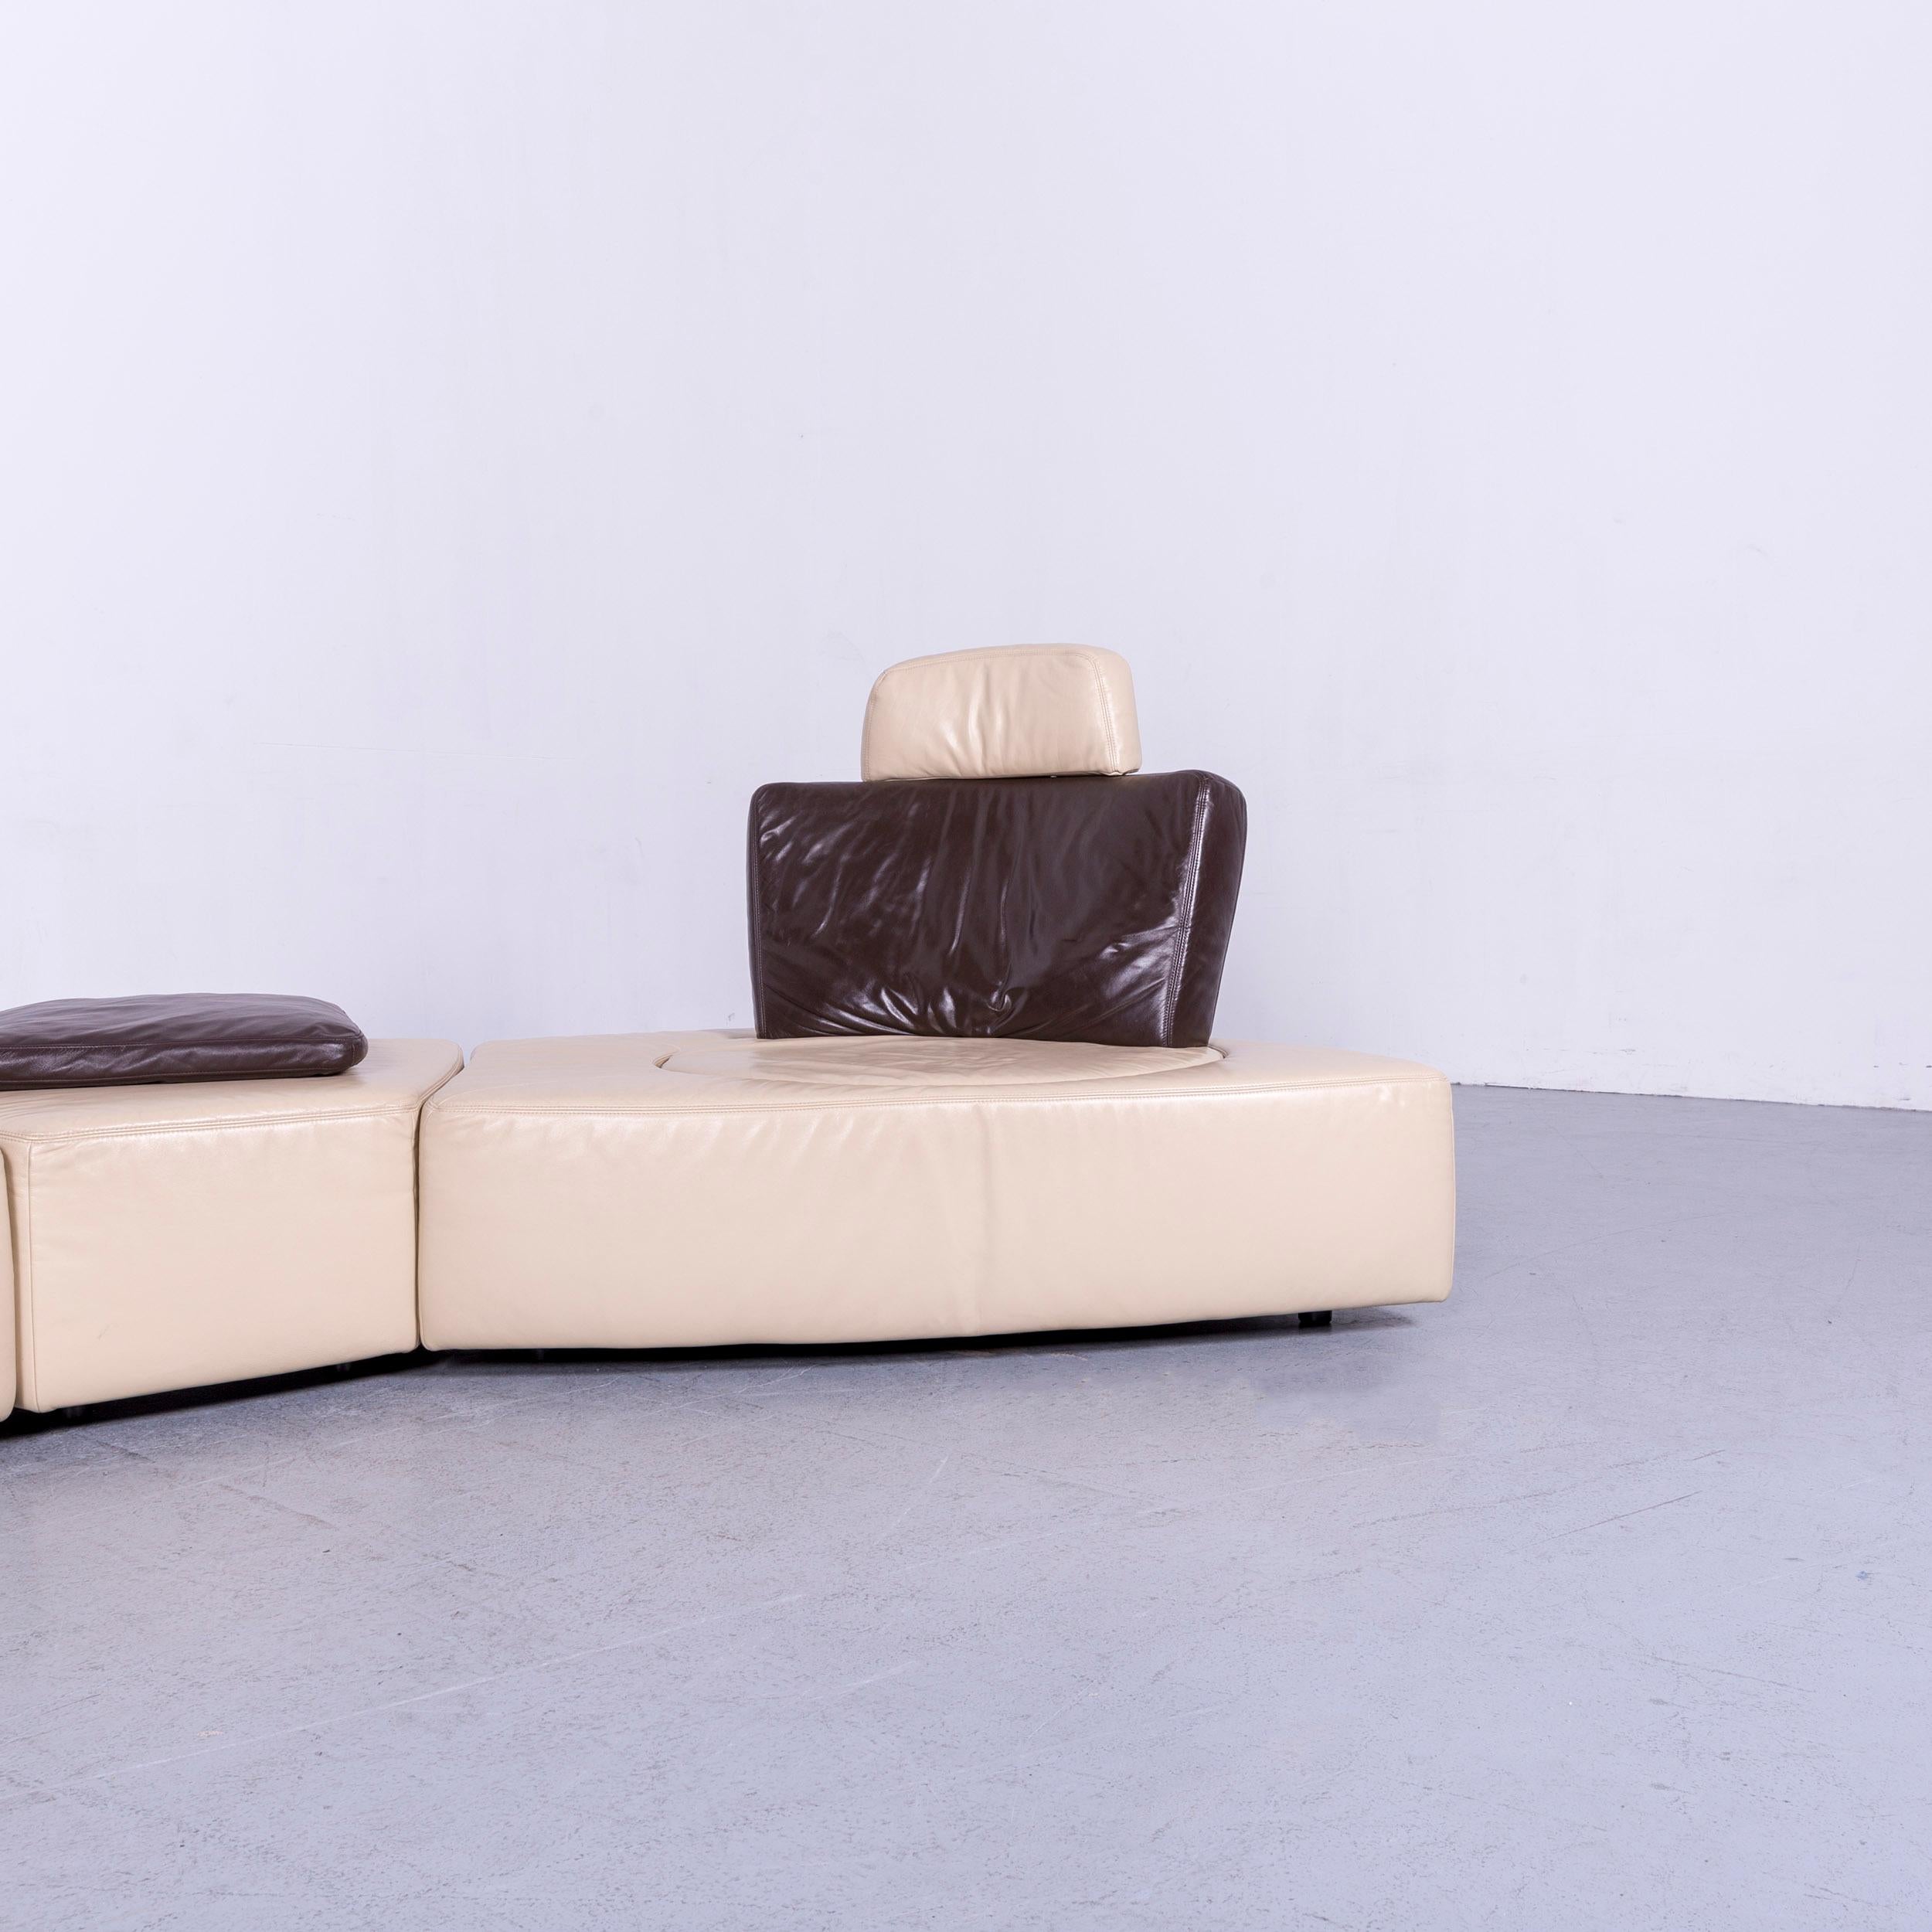 Koinor Leather Corner Sofa Off-White / Brown Four-Seat Function In Good Condition For Sale In Cologne, DE